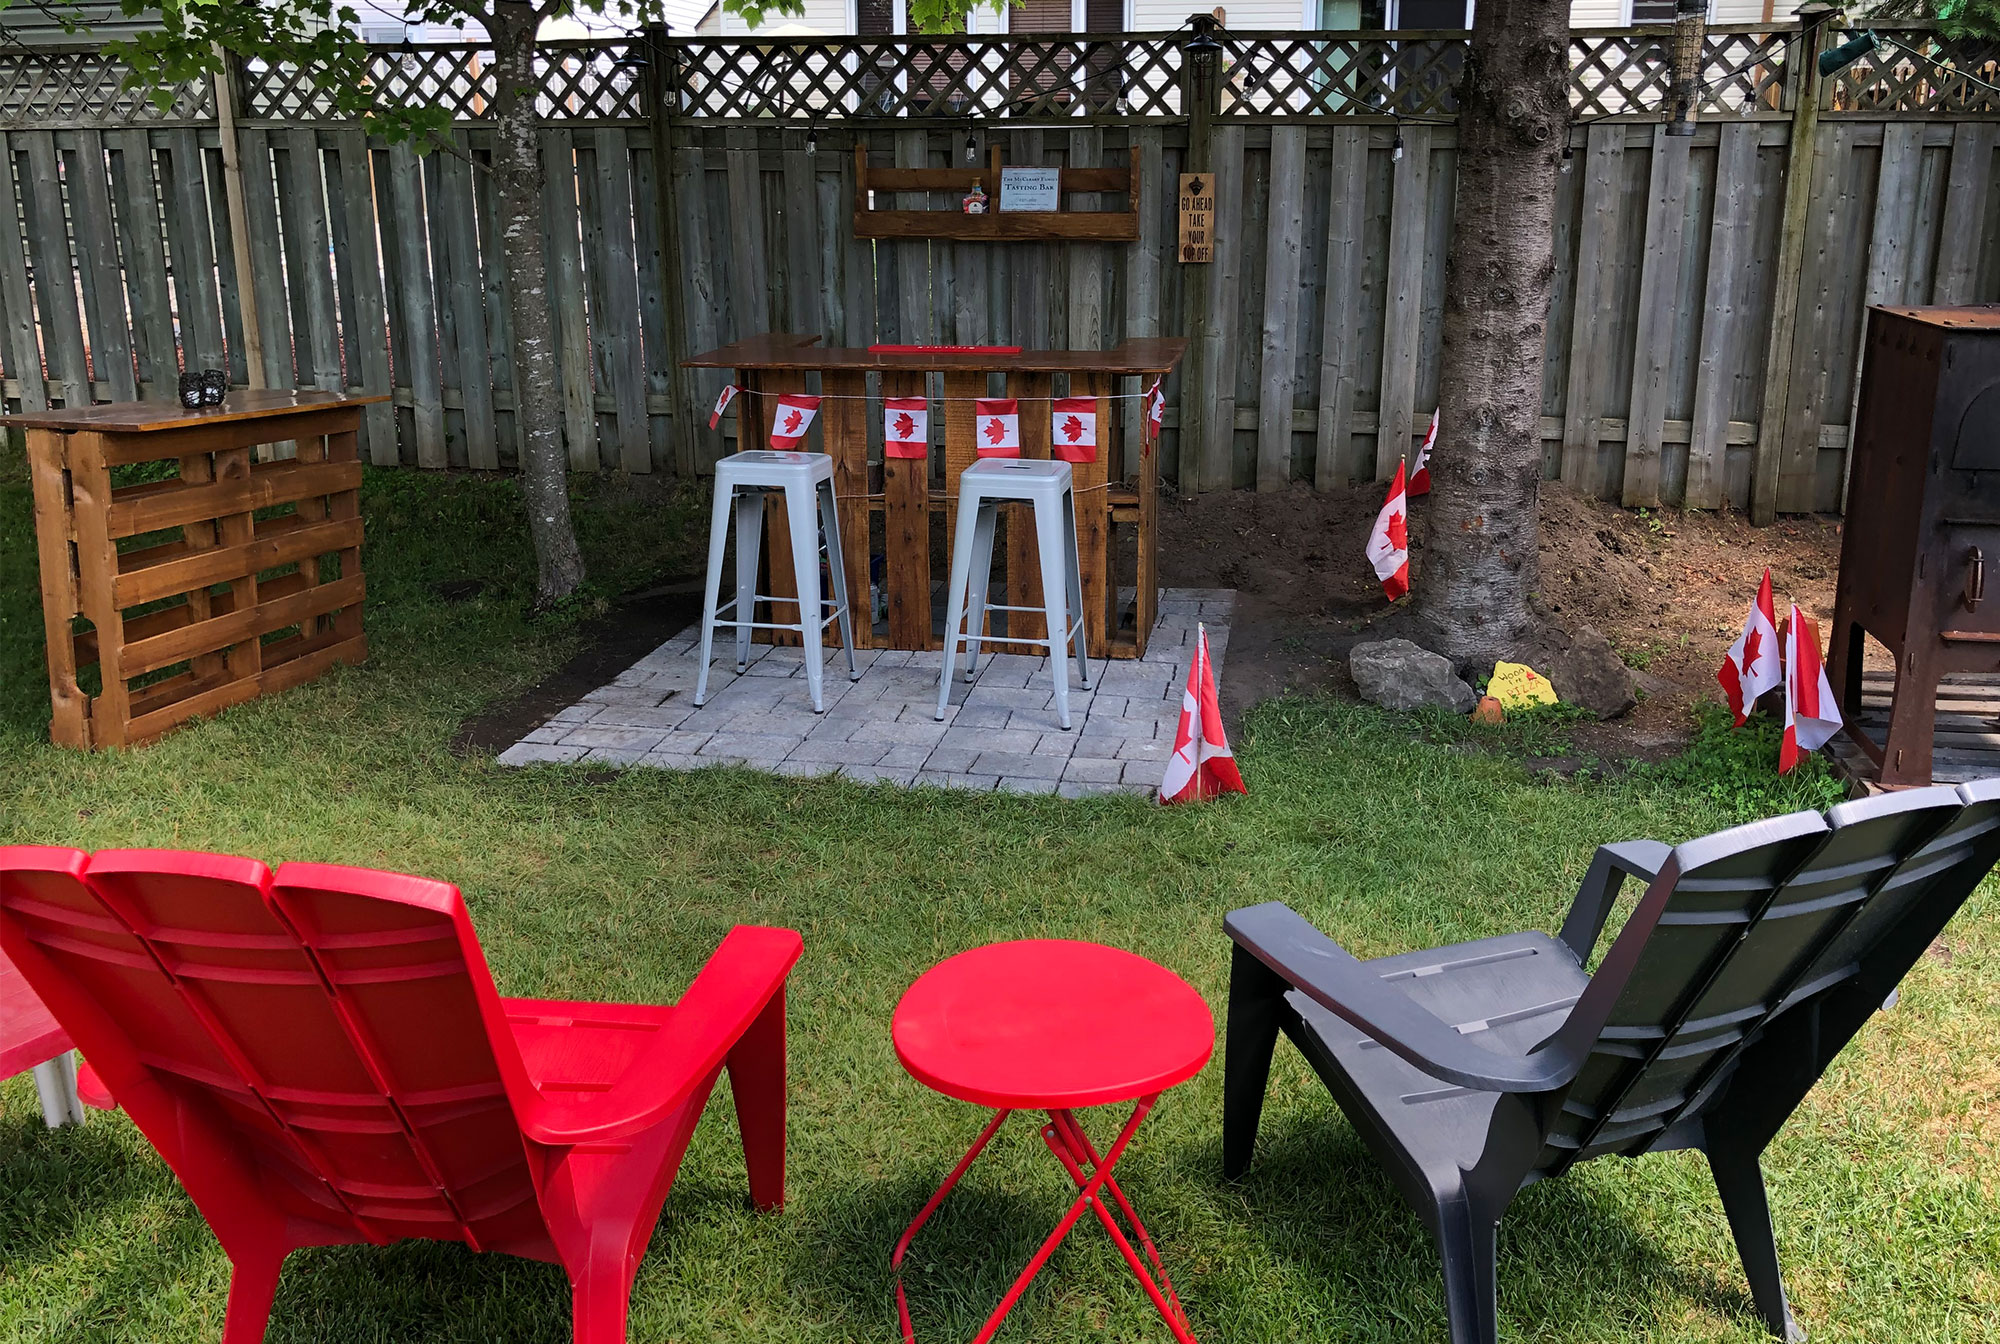 A view of the author’s back yard showing some outdoor chairs, the bar, shelf and pub table.